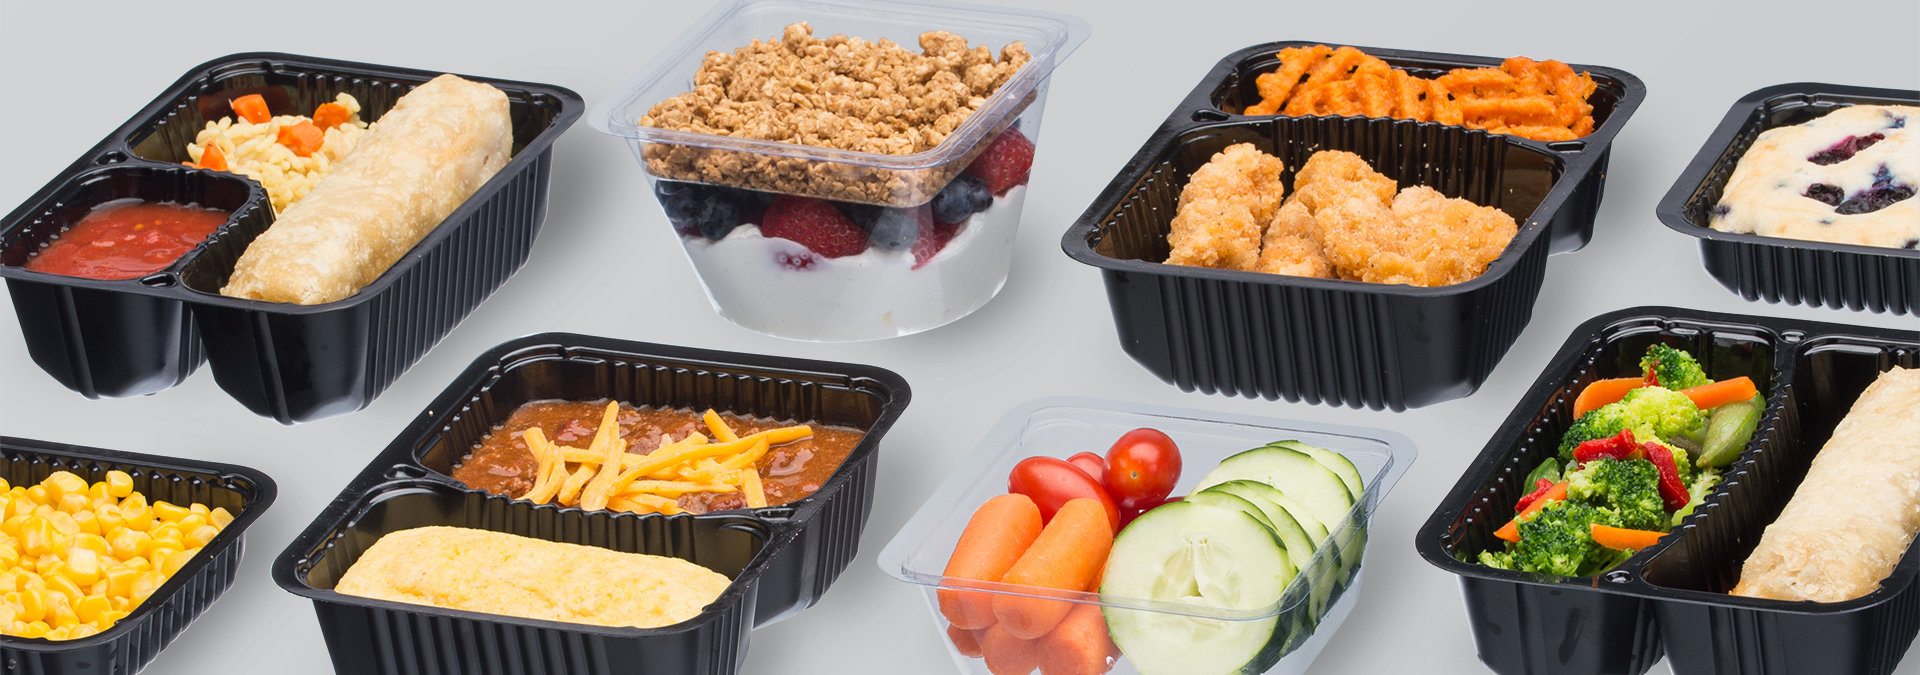 assorted plastic meal containers